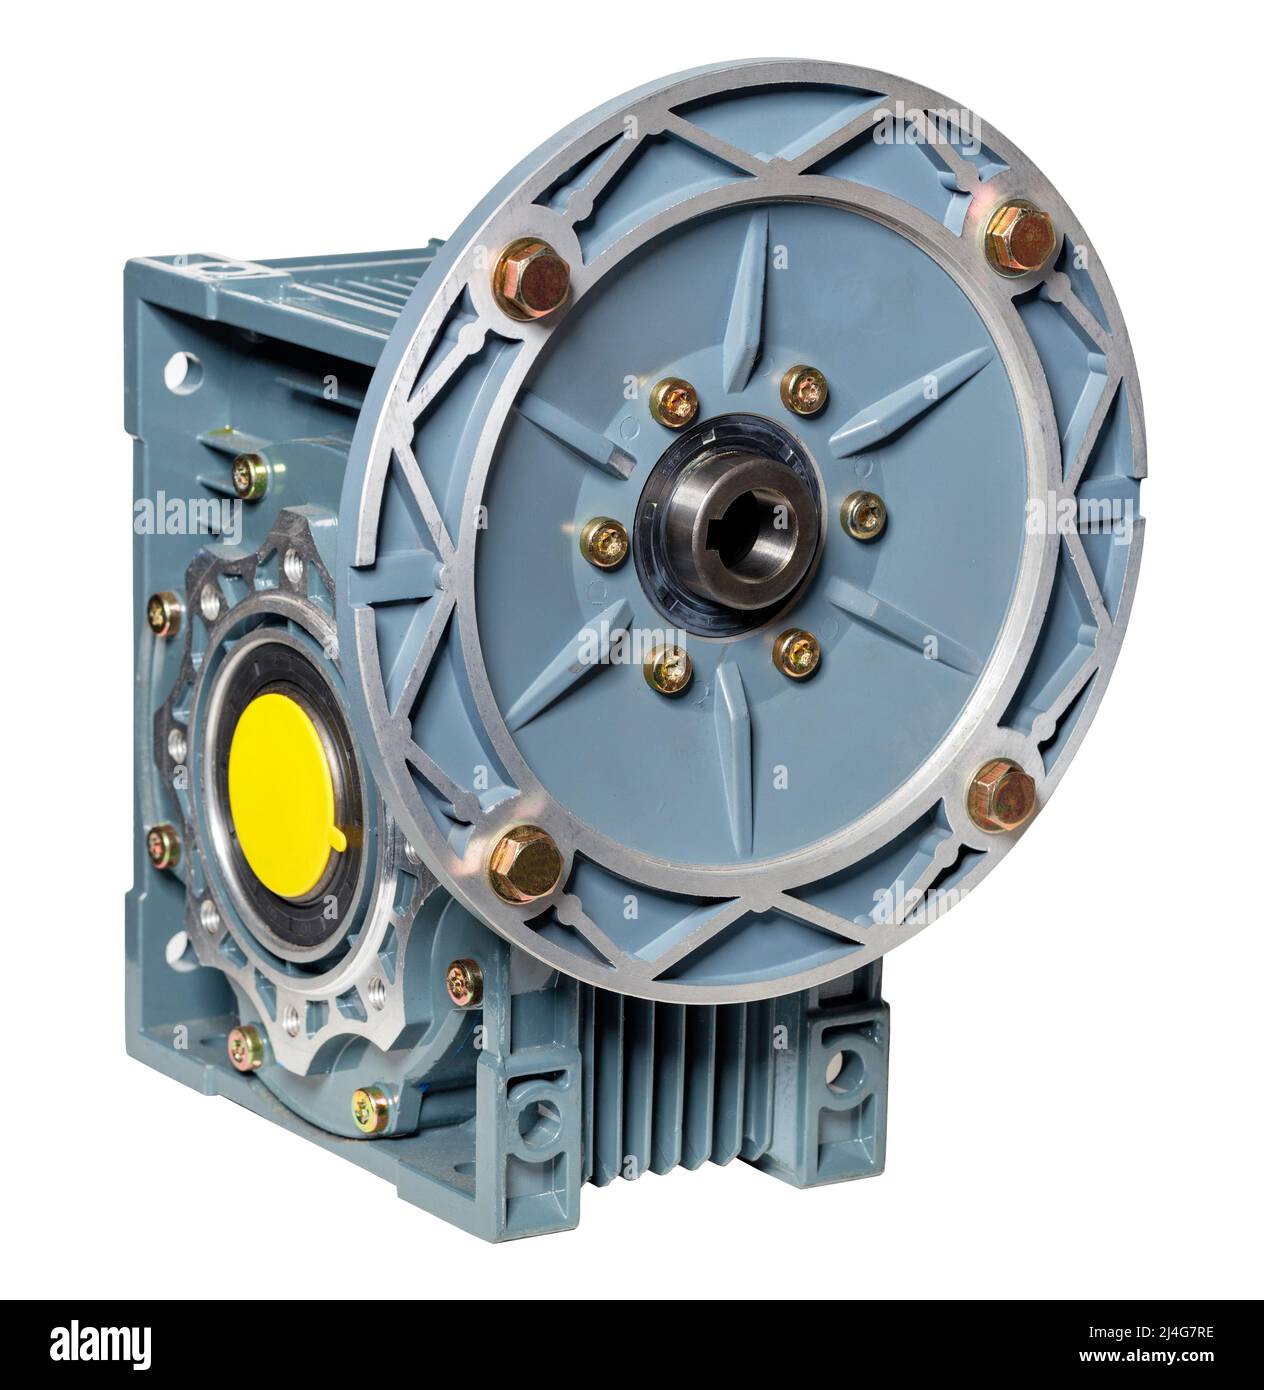 Angle mechanism for torque transmission of electric motors. The image is isolated on a white background. Stock Photo